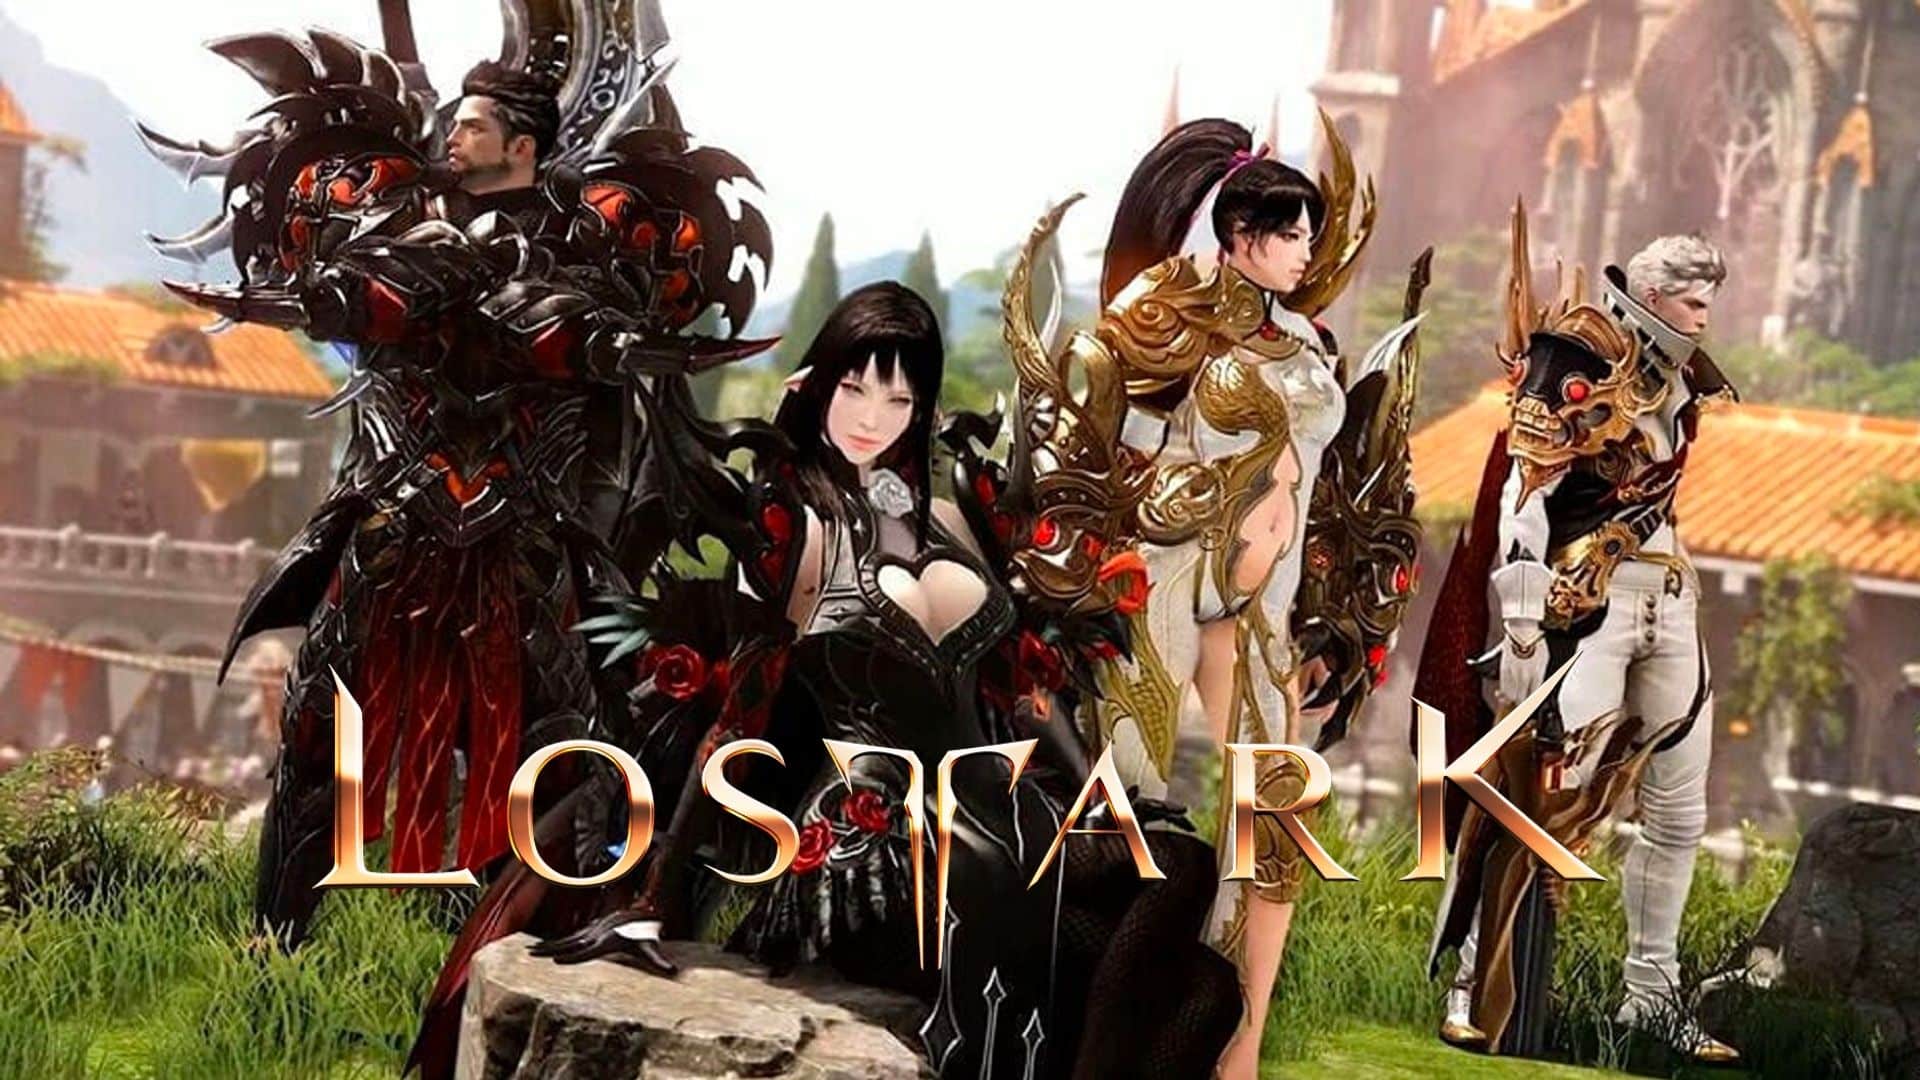 Lost Ark characters gathered together